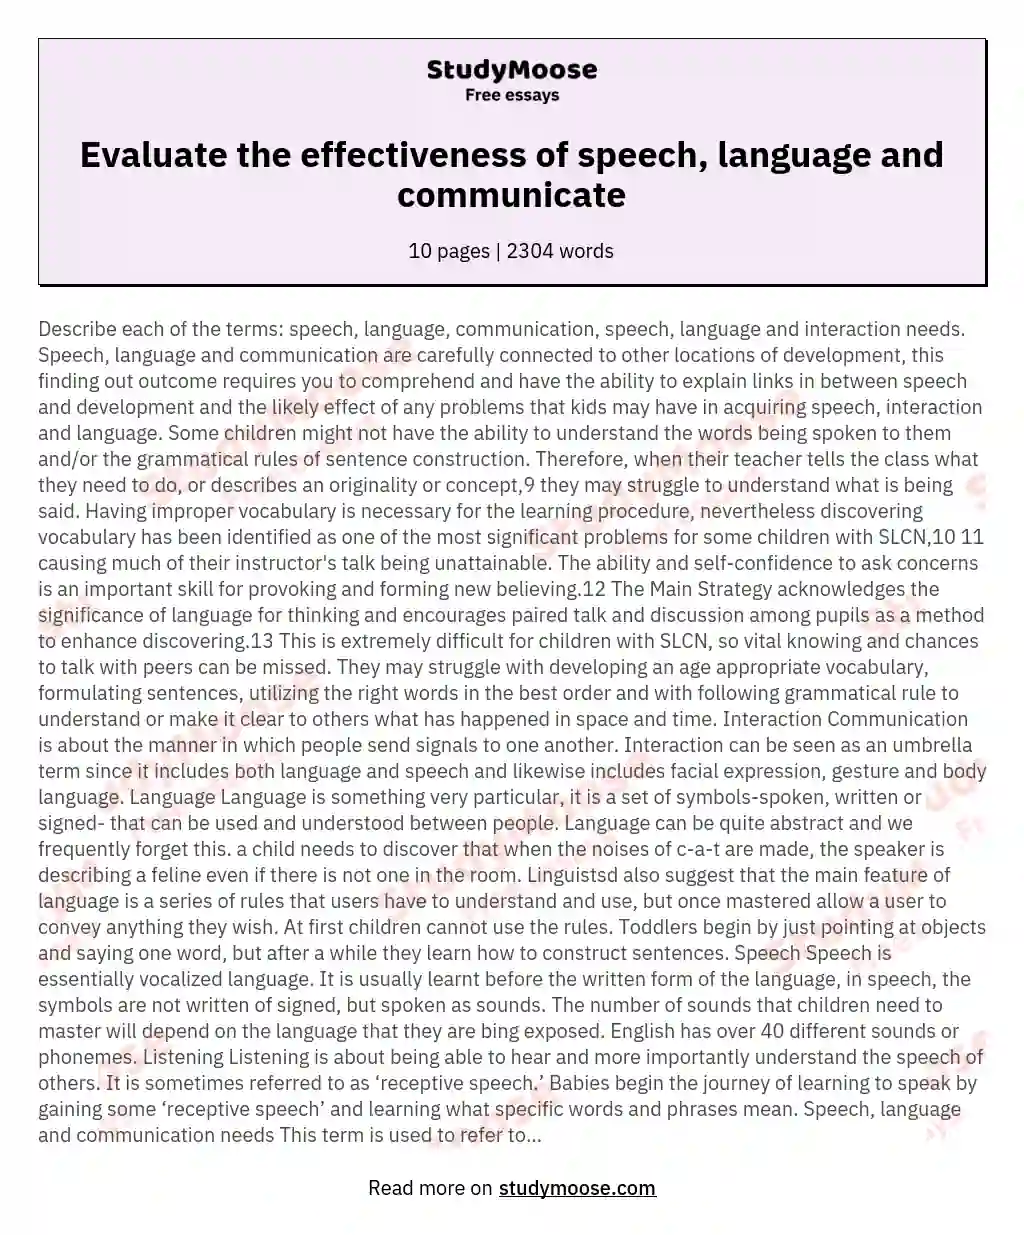 Evaluate the effectiveness of speech, language and communicate essay